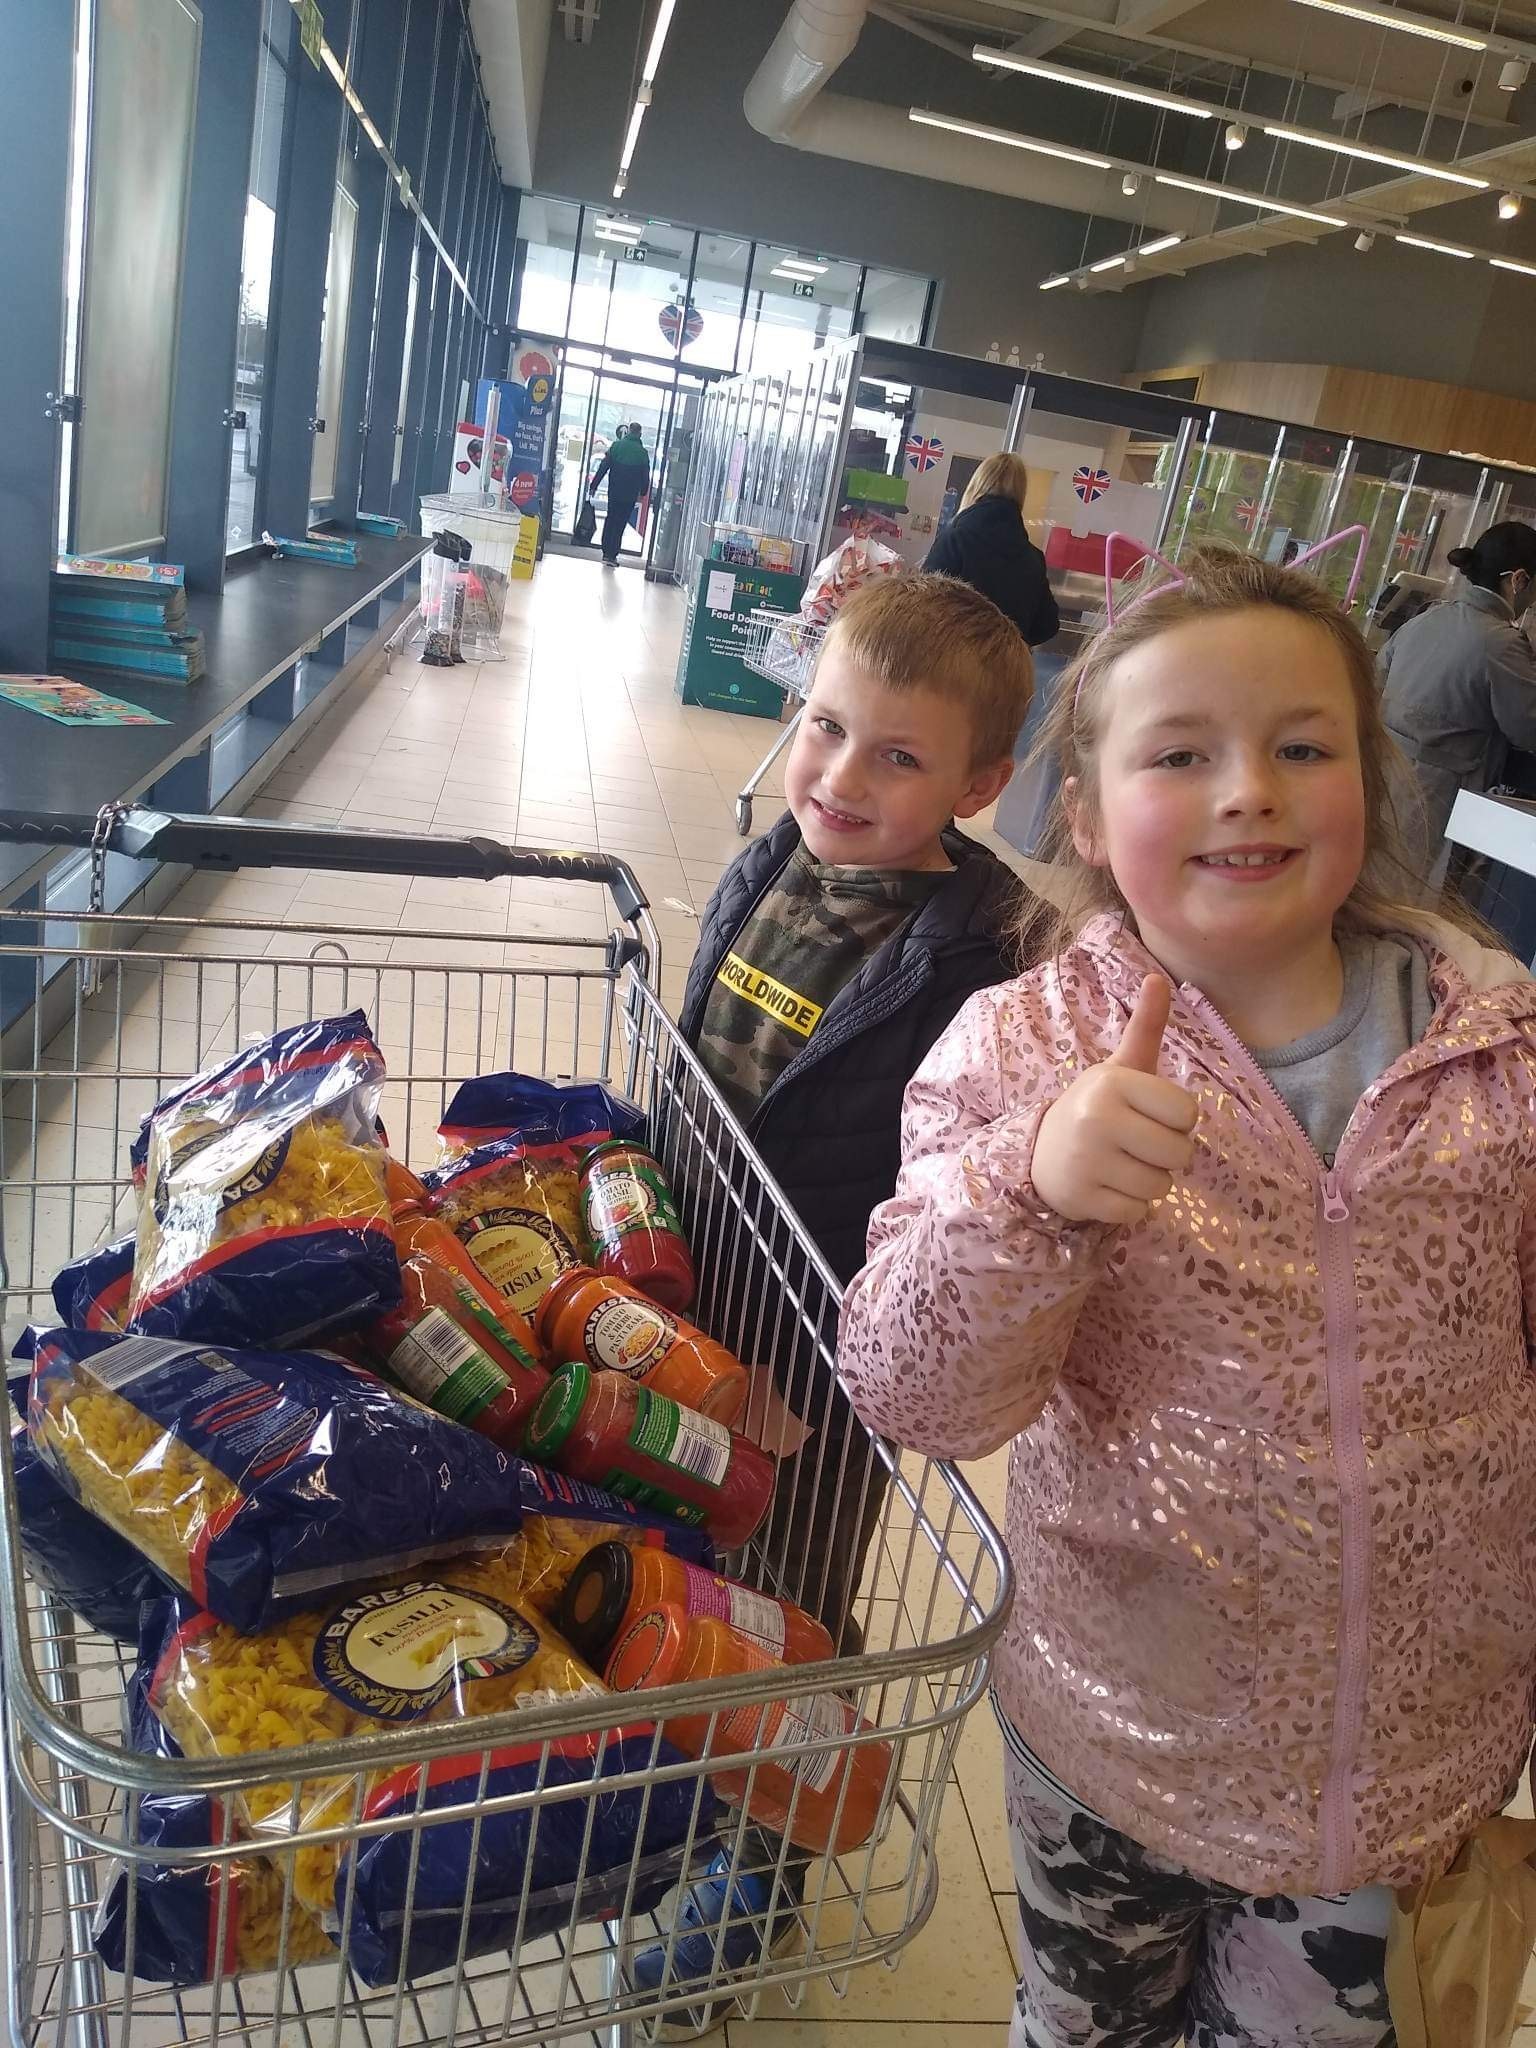 Ava and Arlo with their food for Feeding Families 